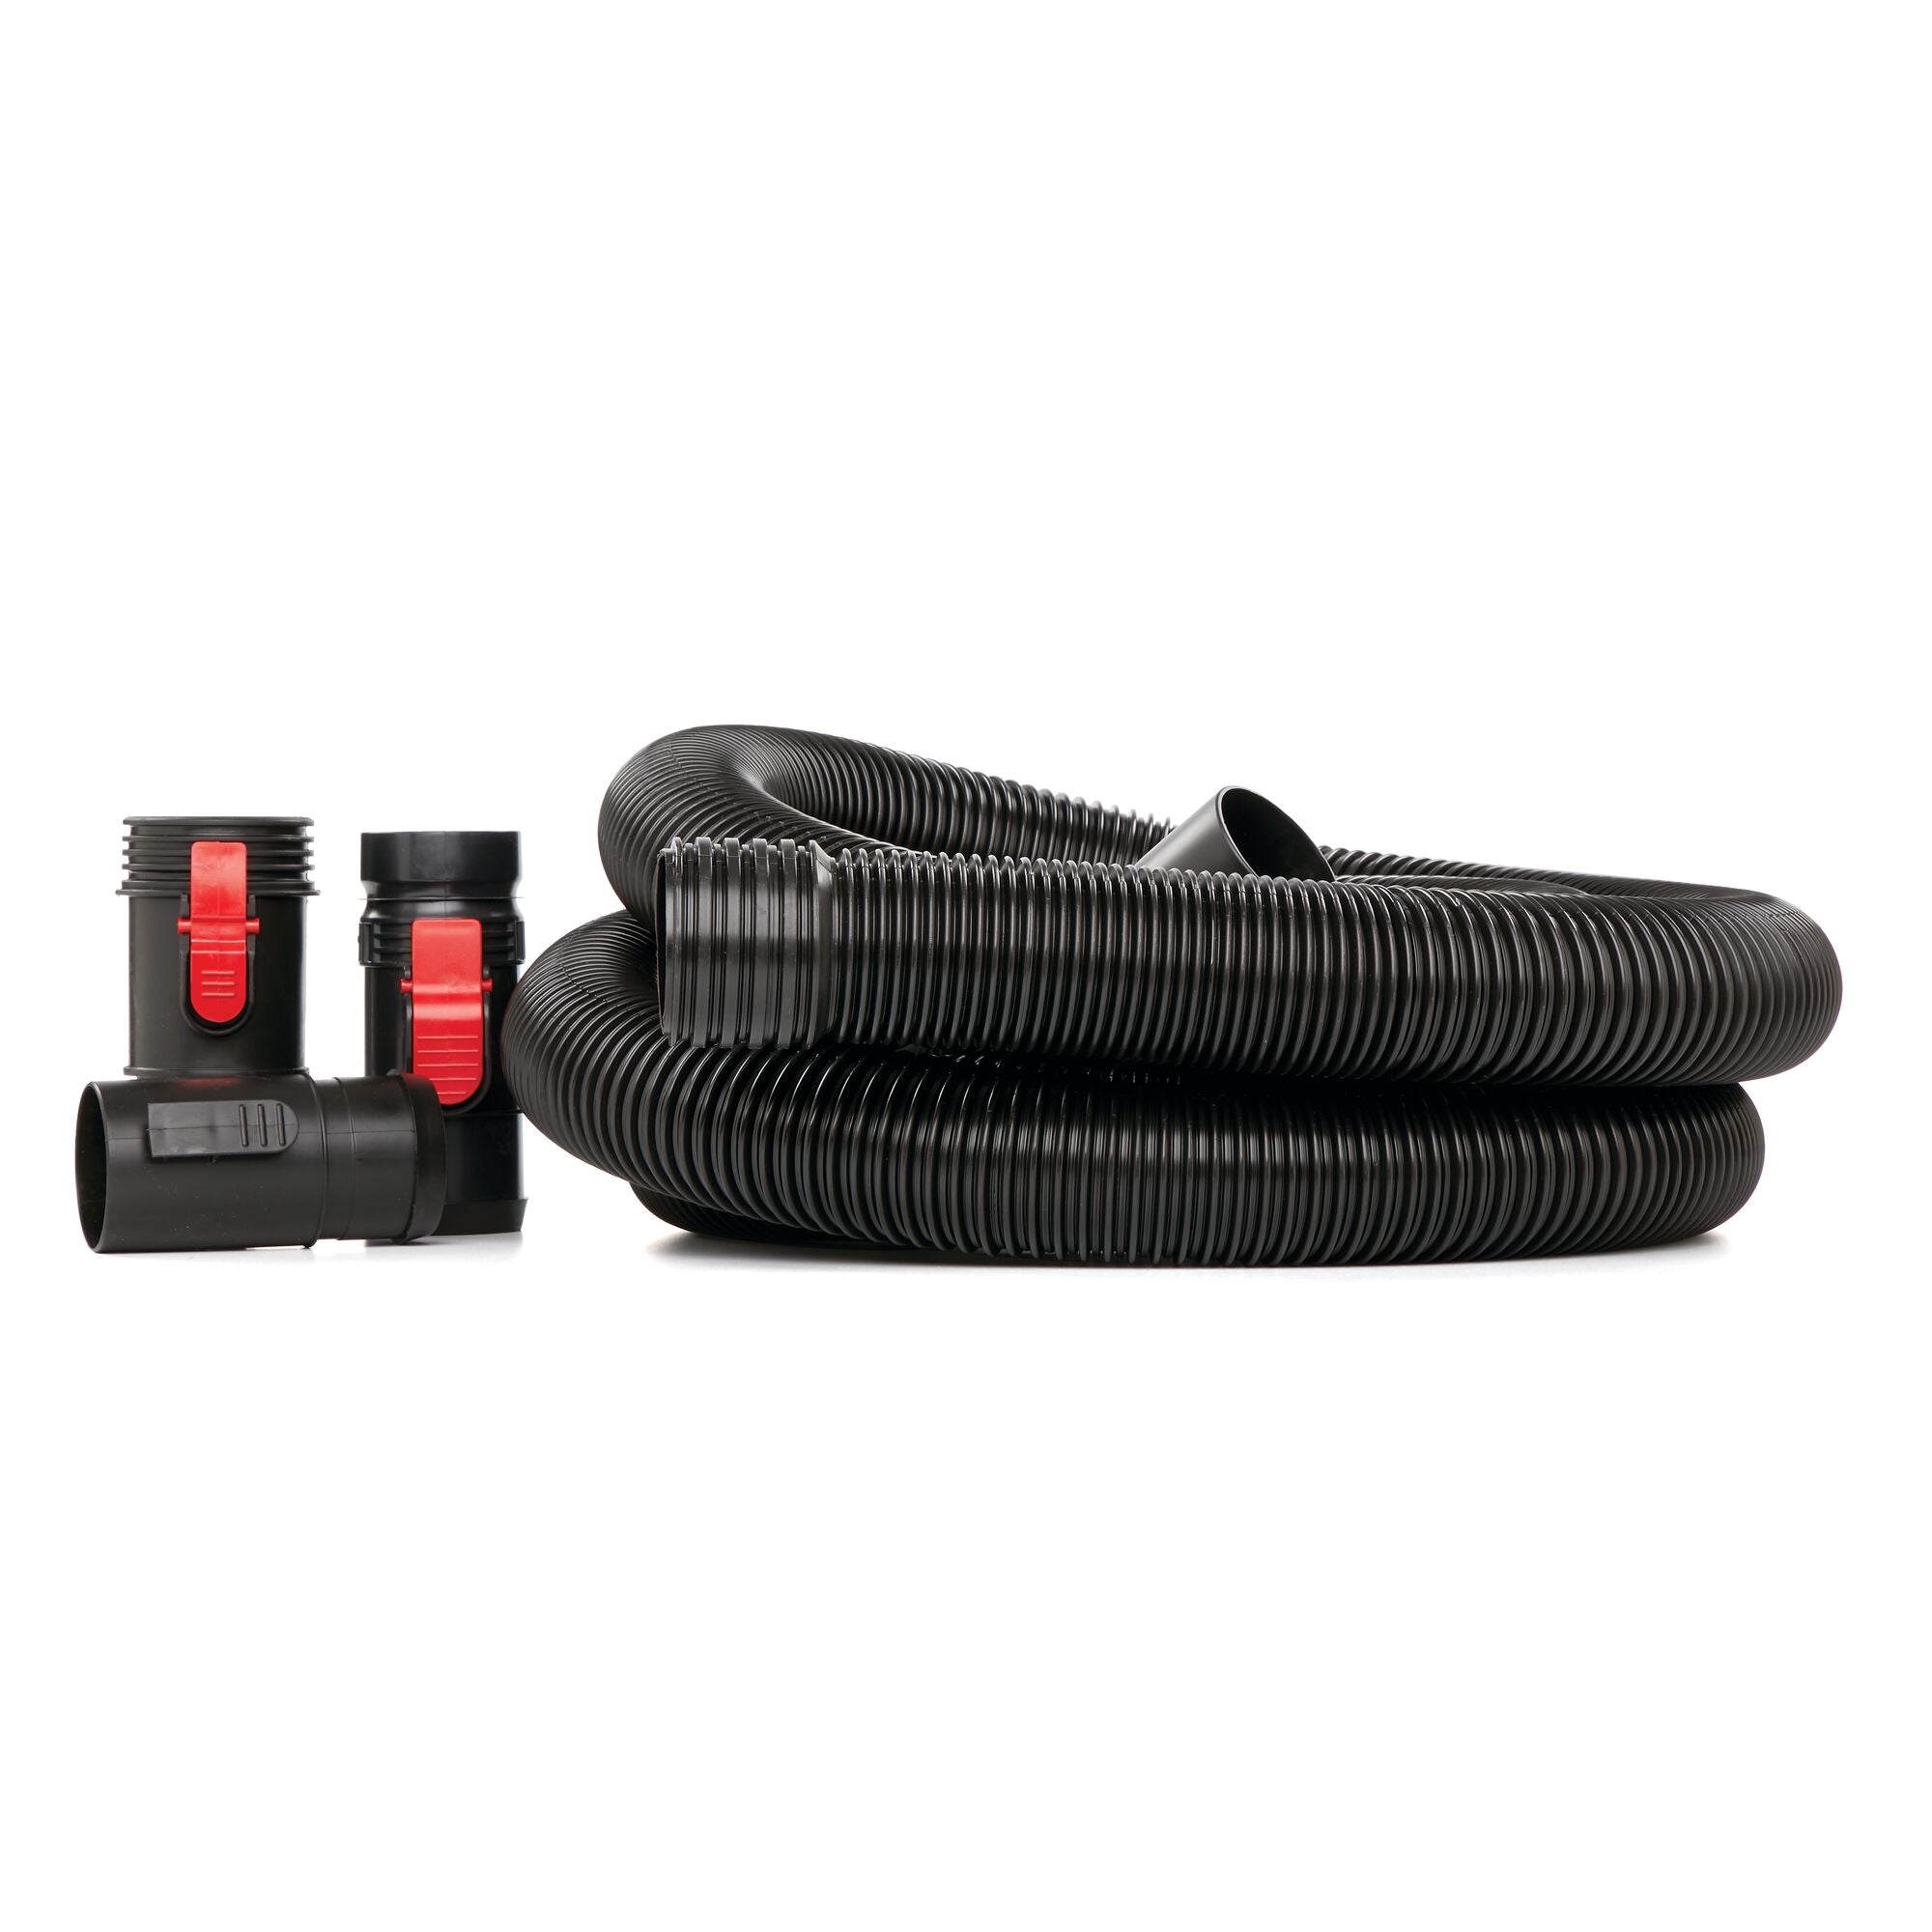 Two and a half inch by 13 Foot Locking Wet or Dry Vacuum Hose Kit.